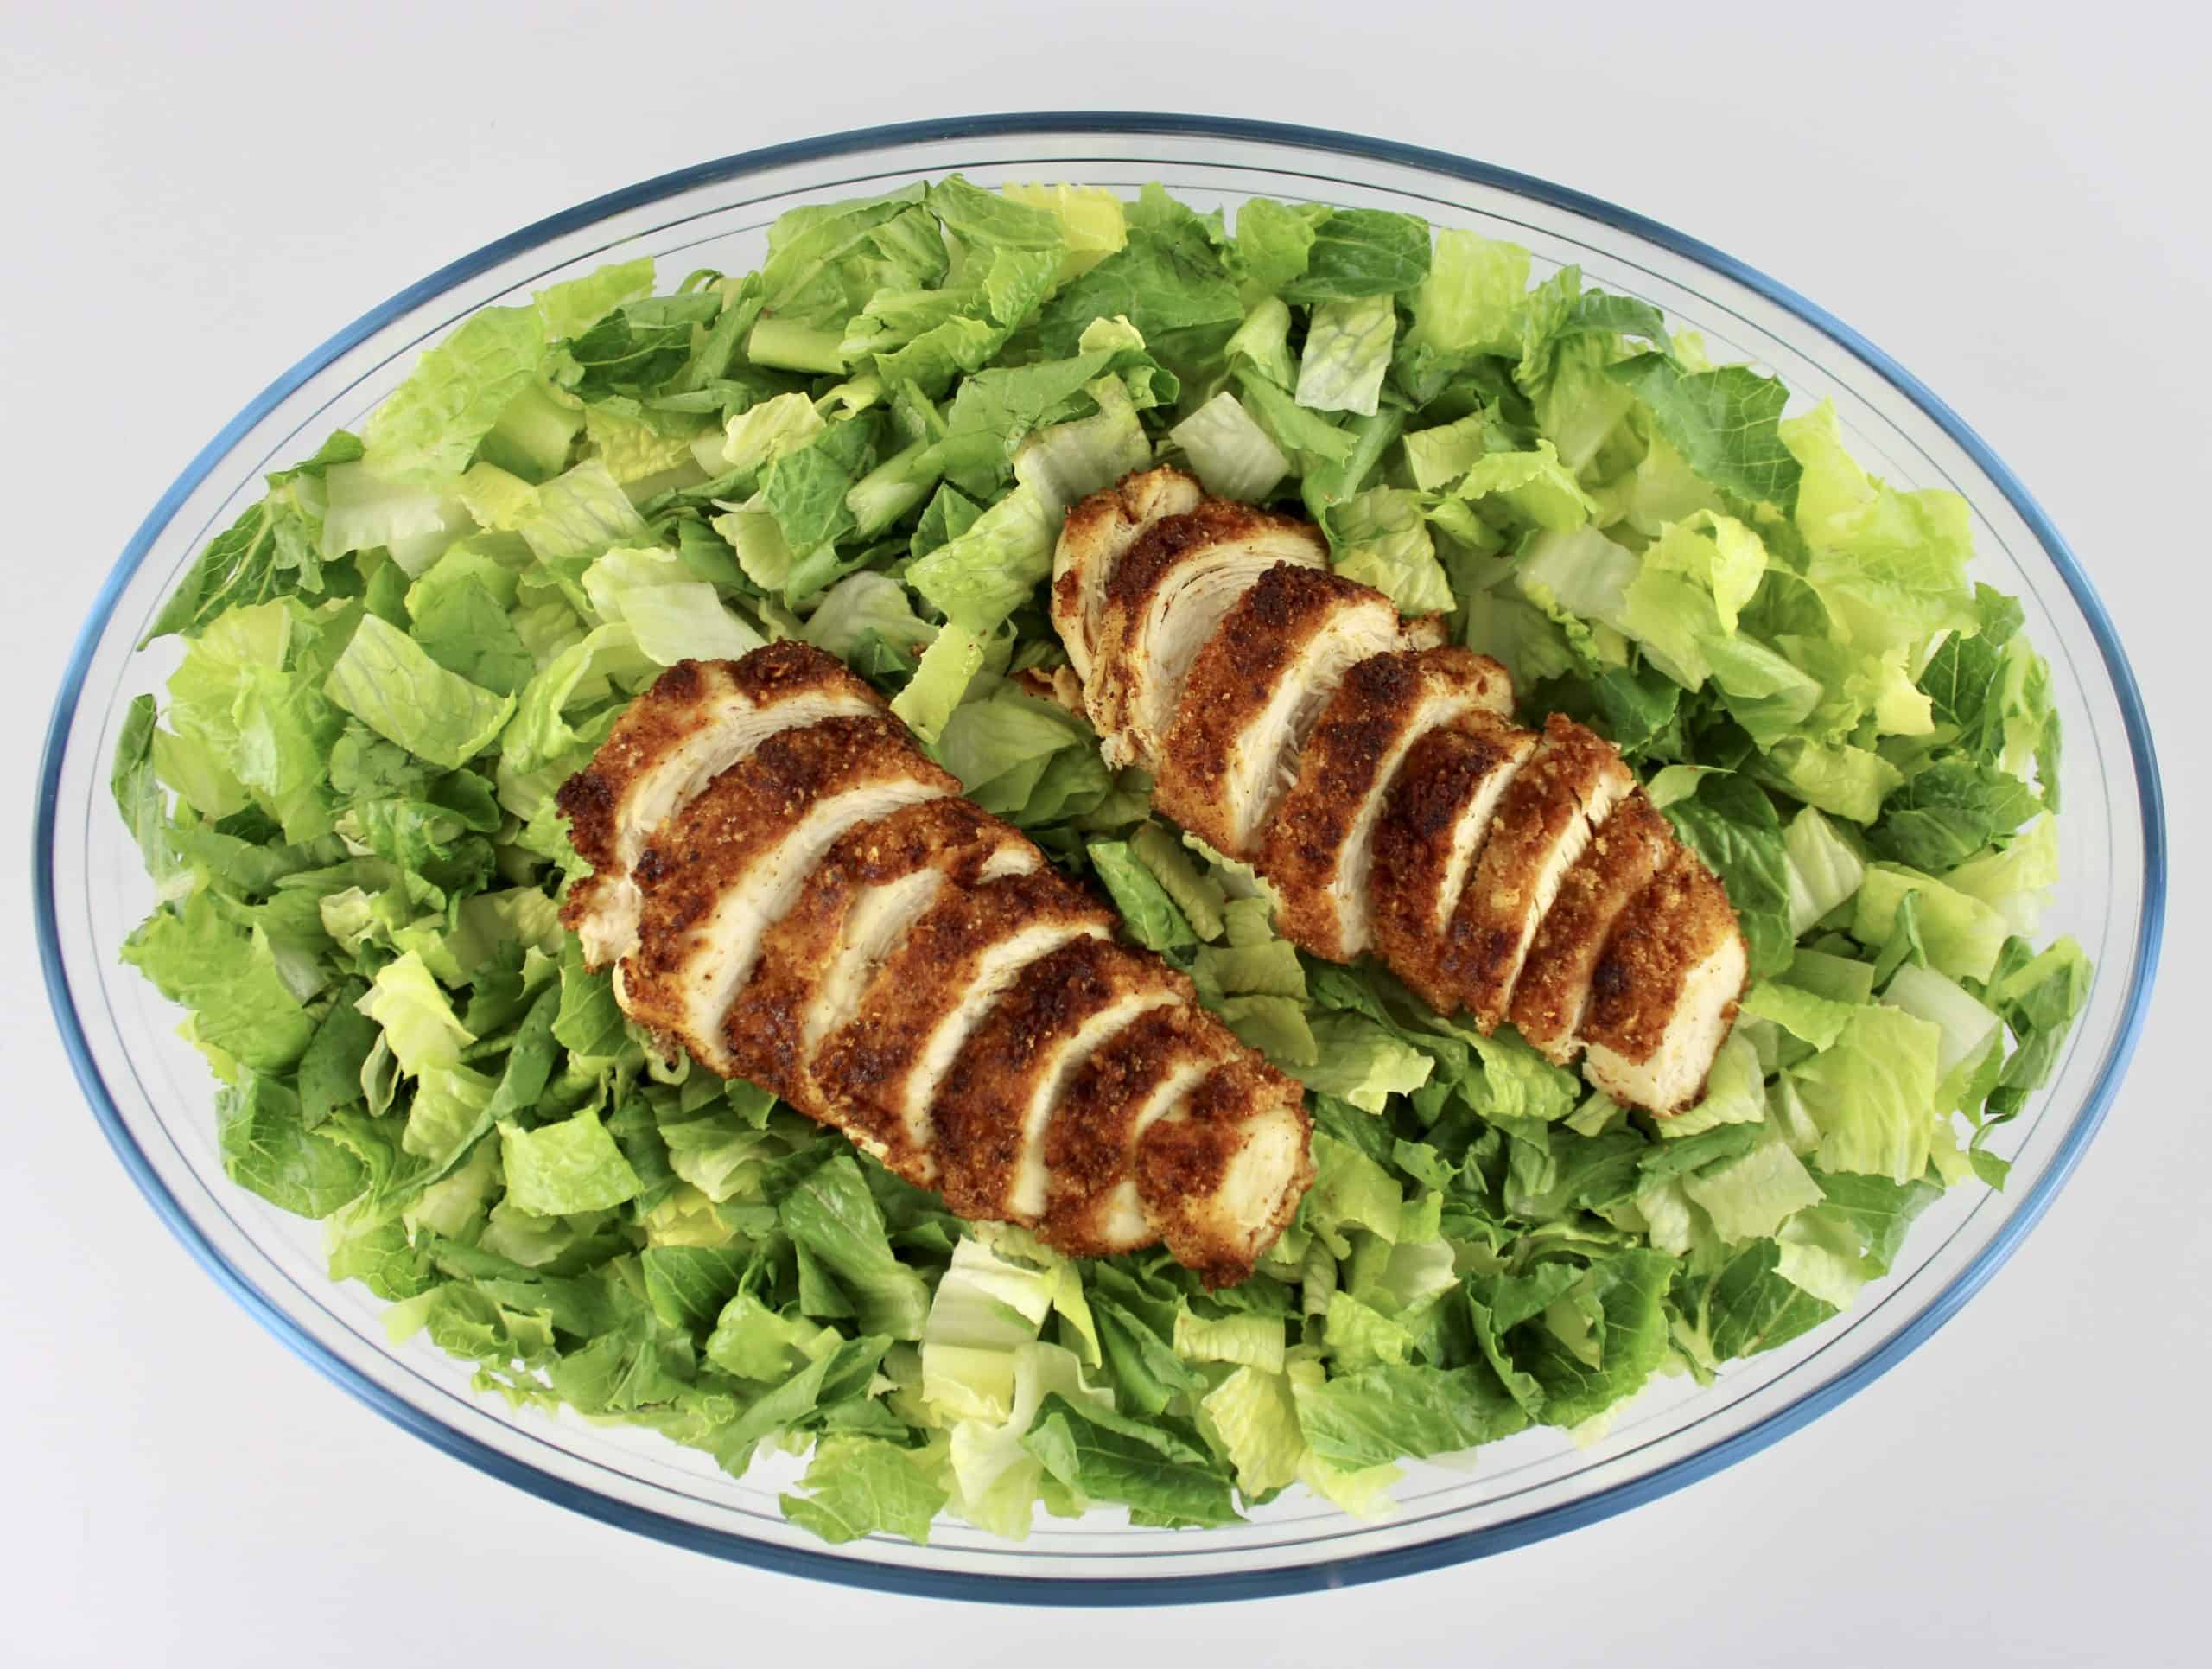 chopped romaine lettuce and 2 sliced chicken breast on top in oval glass bowl